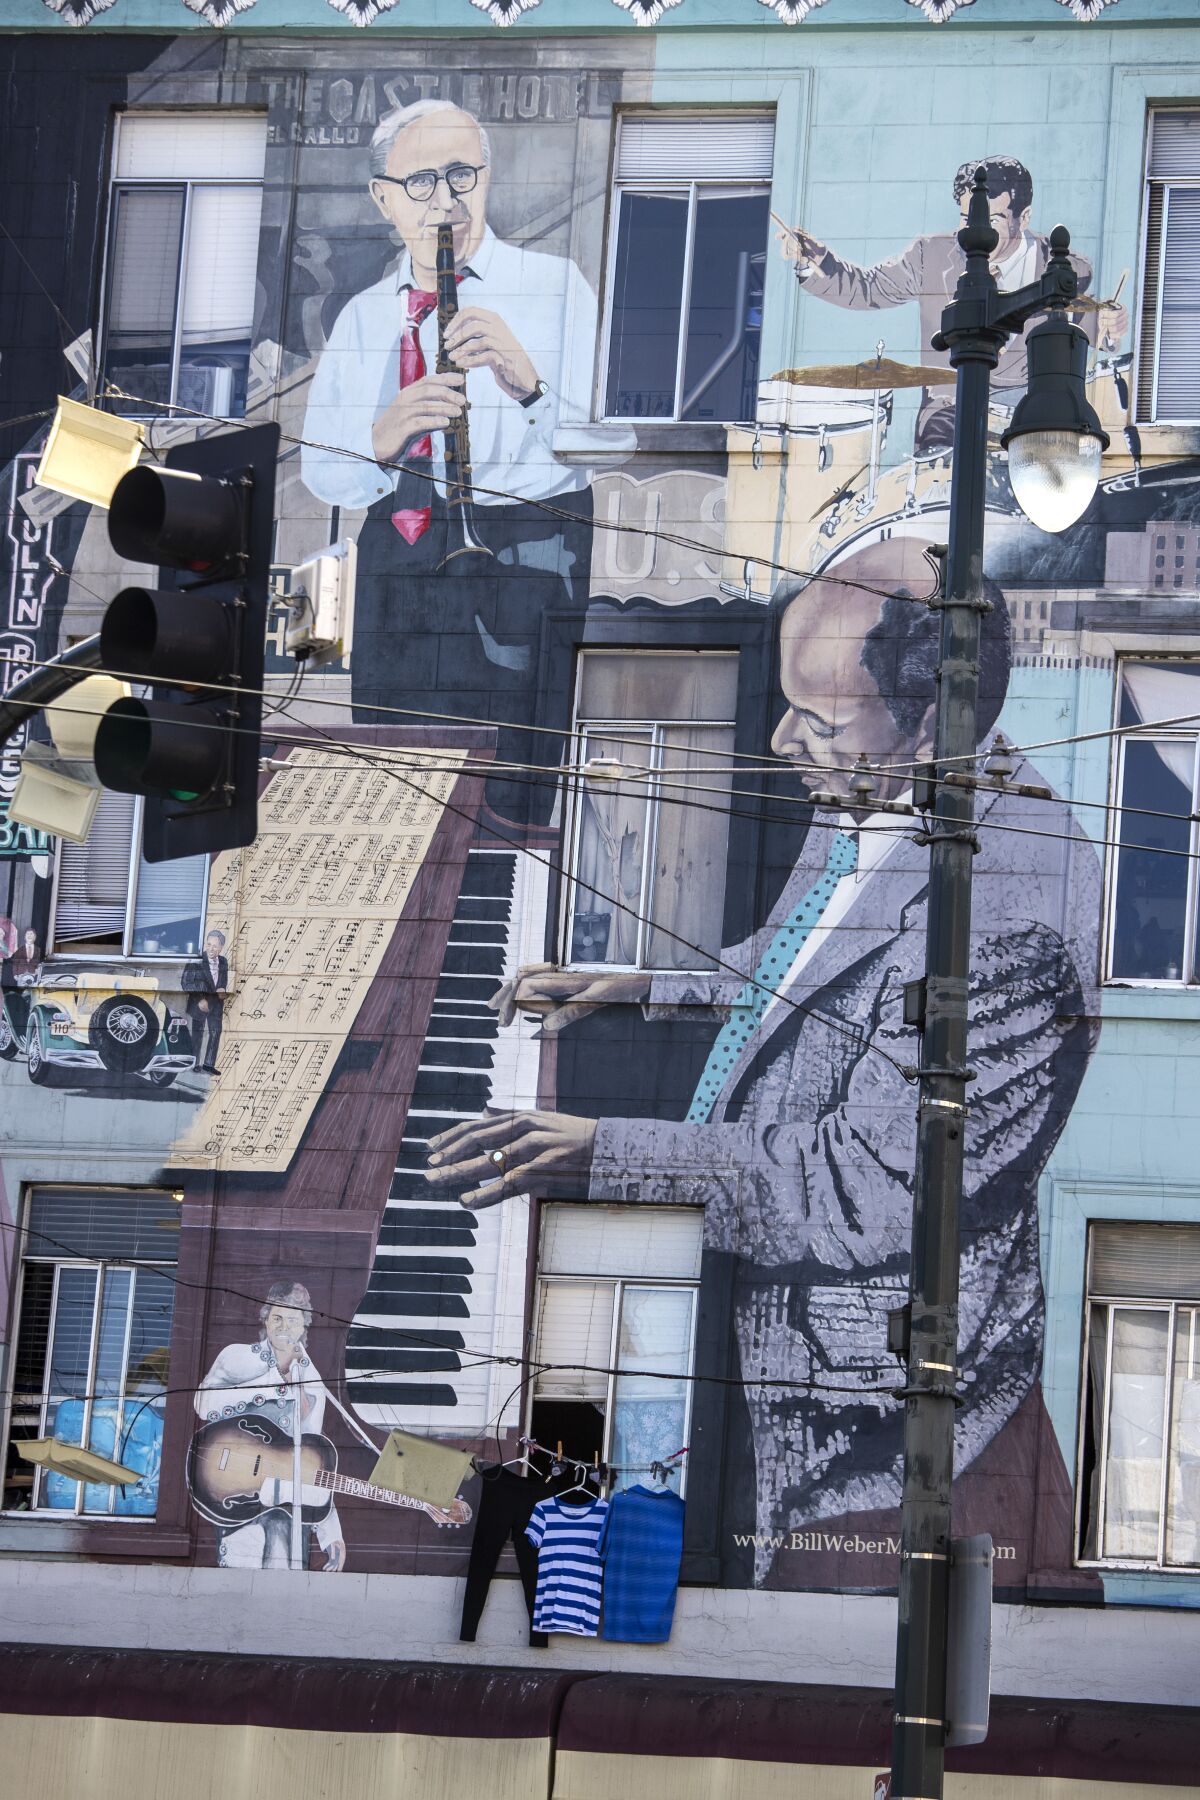 Bill Weber’s “Jazz Mural” adorns a building at the intersection of Broadway and Columbus Avenue in San Francisco's North Beach neighborhood.